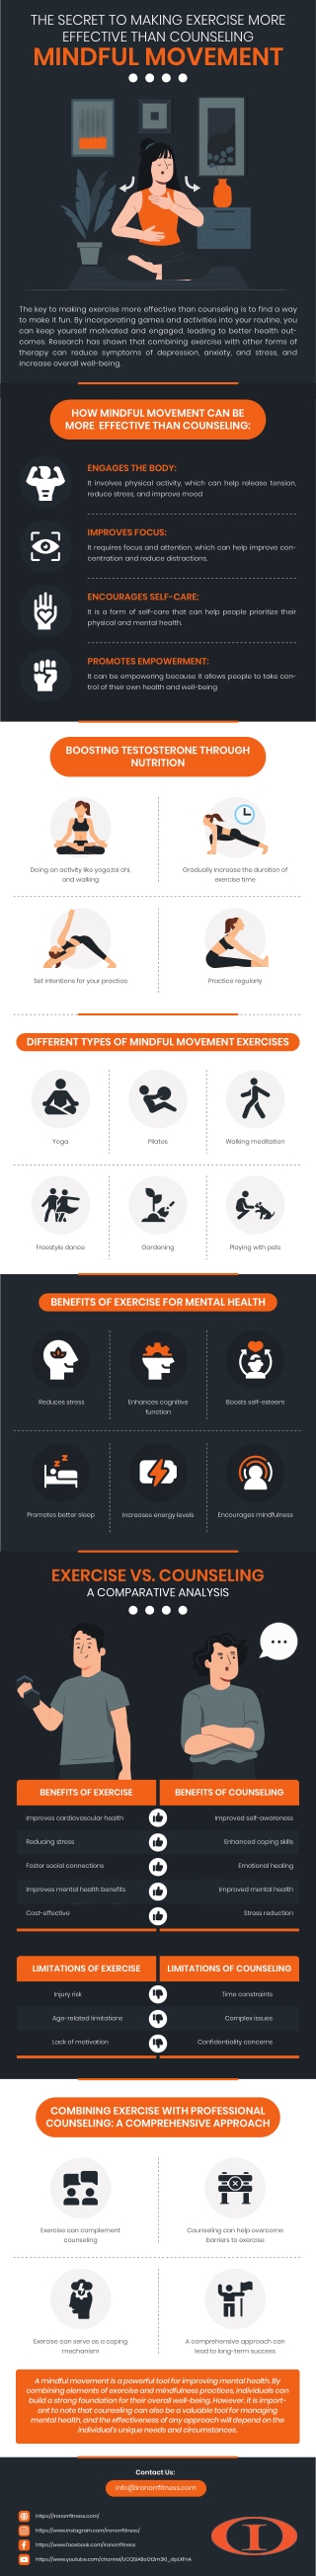 The secret to make effective exercise more than counselling mindful movement